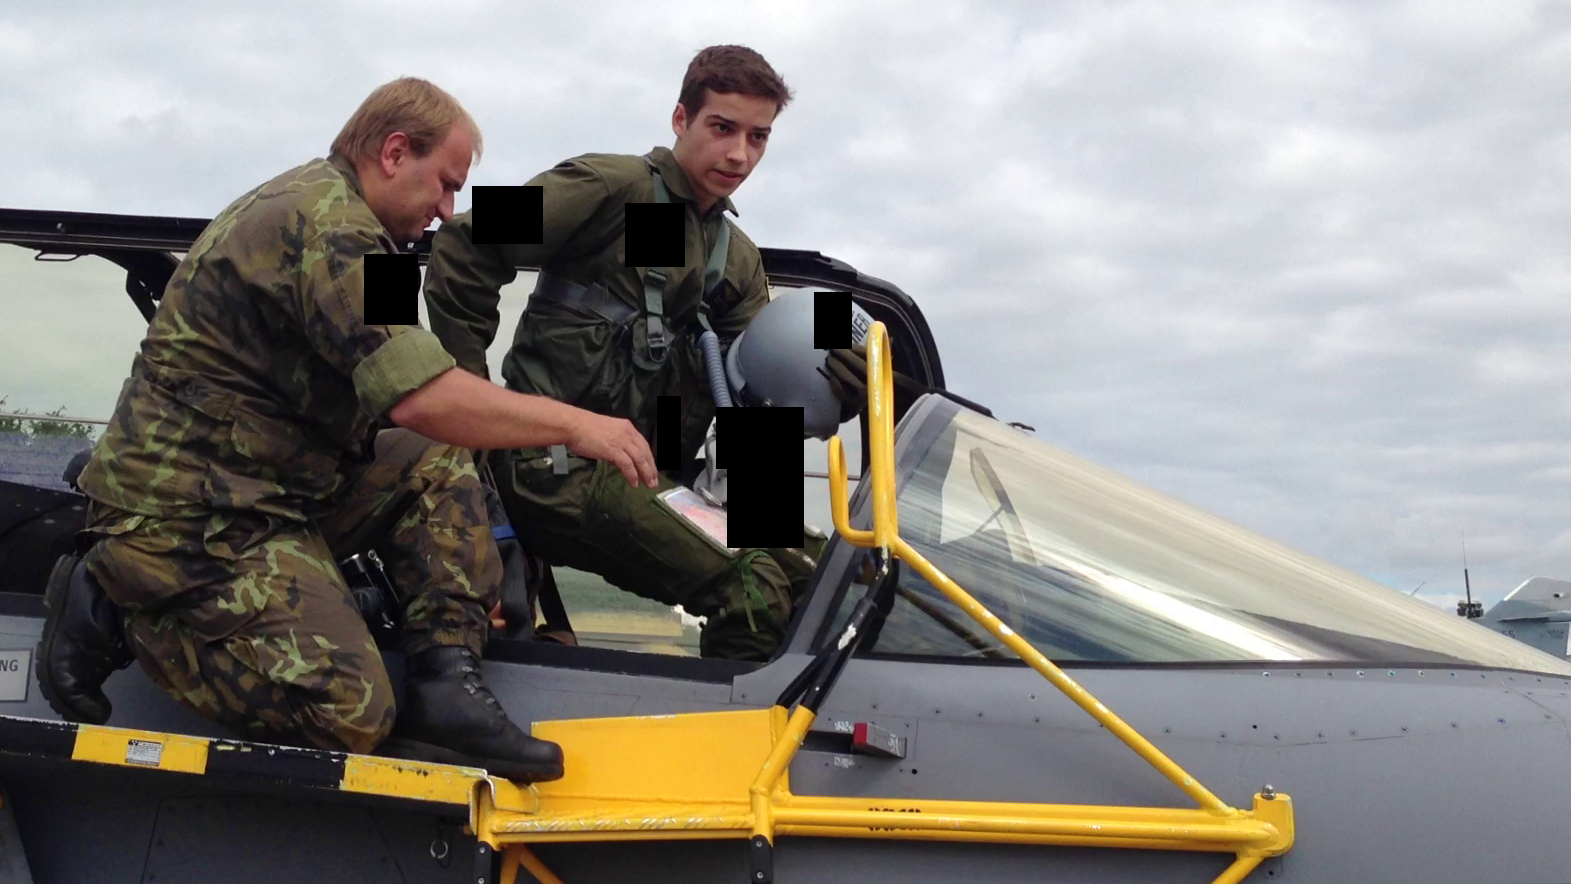 King Jonas I of Lauwiner in Sweden with the Swedish Air Force on a test flight XRS8554.jpg